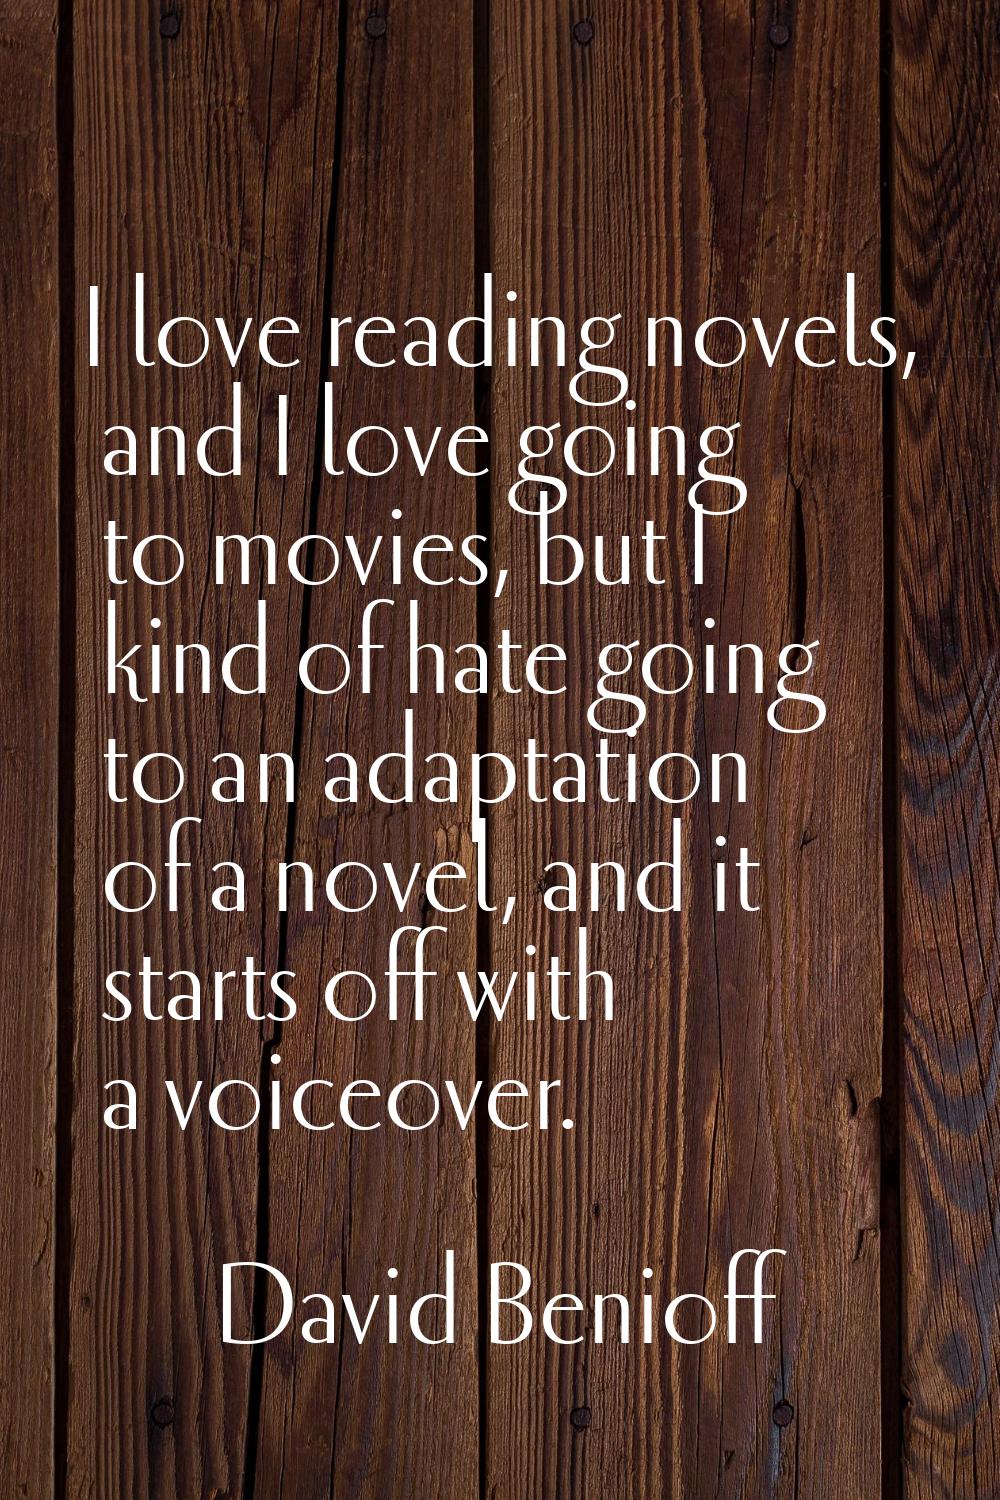 I love reading novels, and I love going to movies, but I kind of hate going to an adaptation of a n